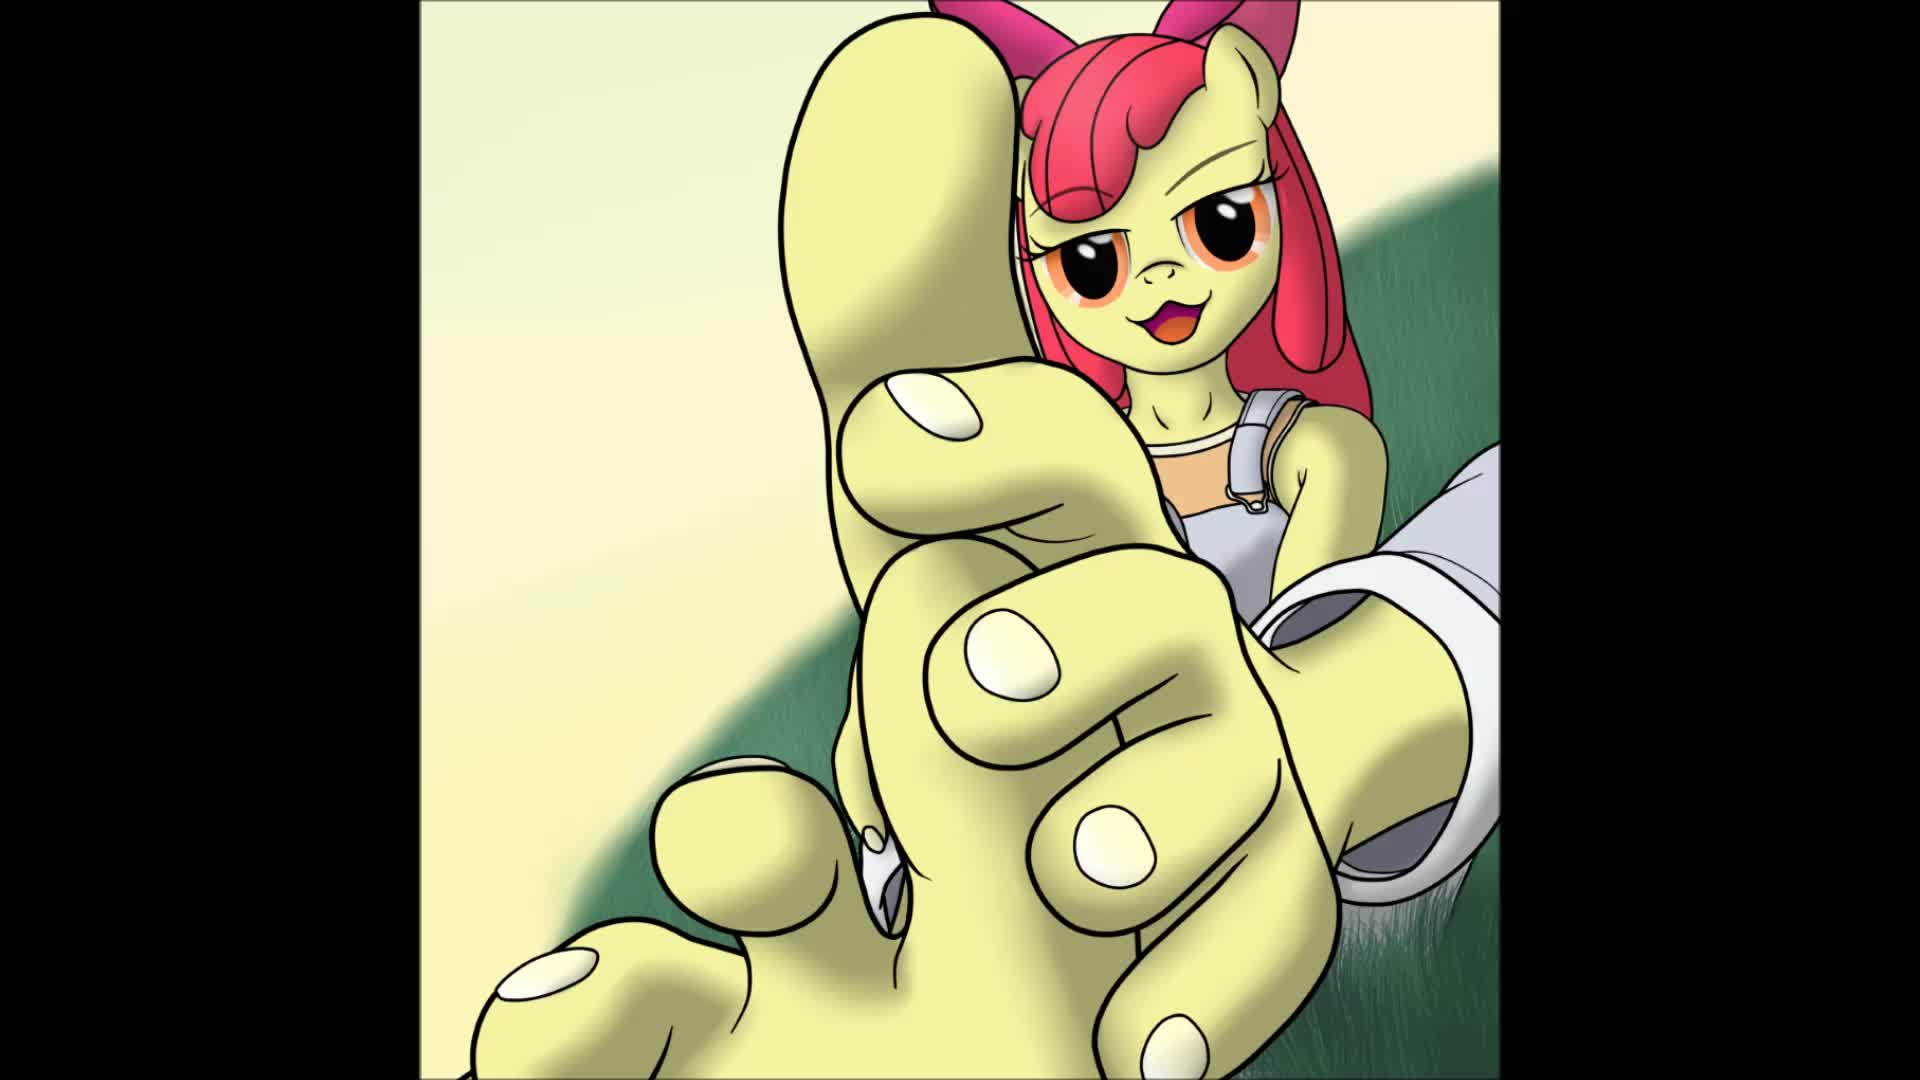 Anthro Foot Porn - My Little Pony Footjob Compilation Part 2 - Feet9